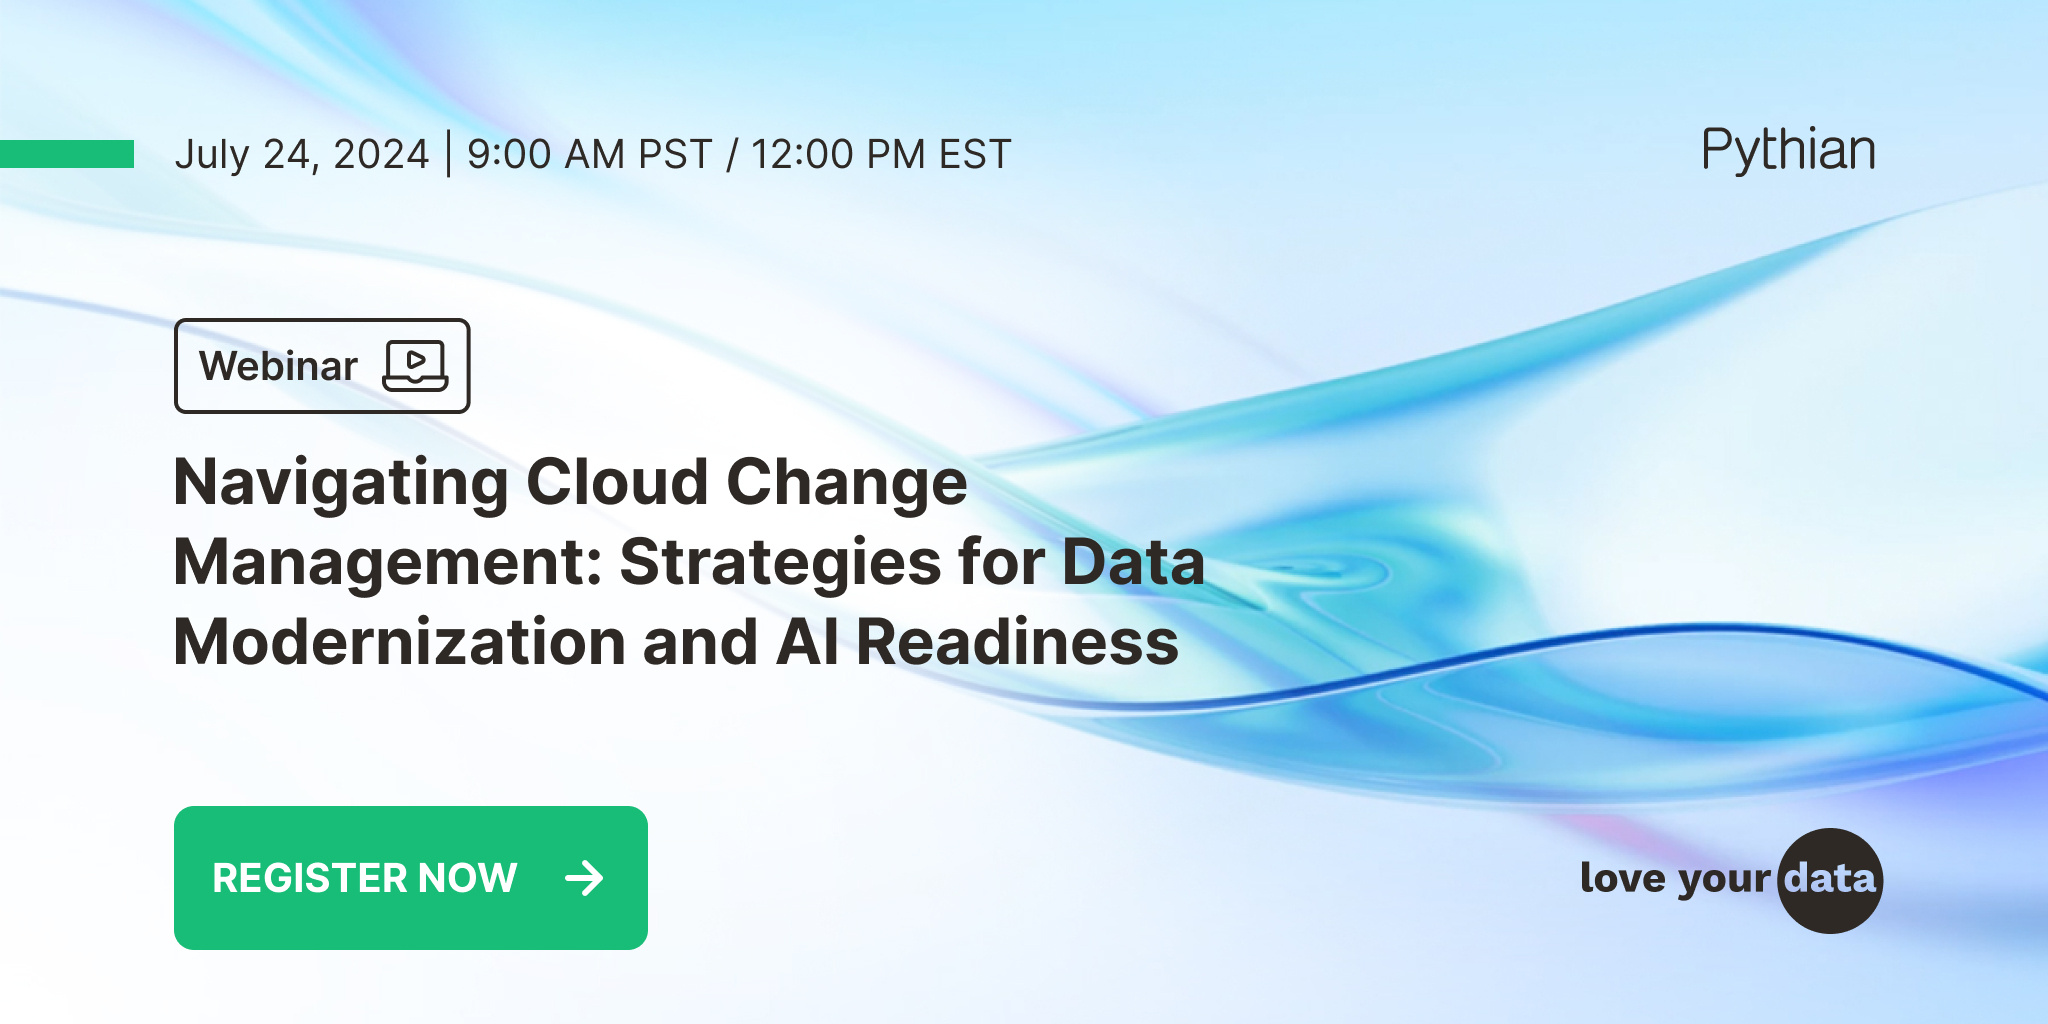 Navigating Cloud Change Management: Strategies for Data Modernization and AI Readiness